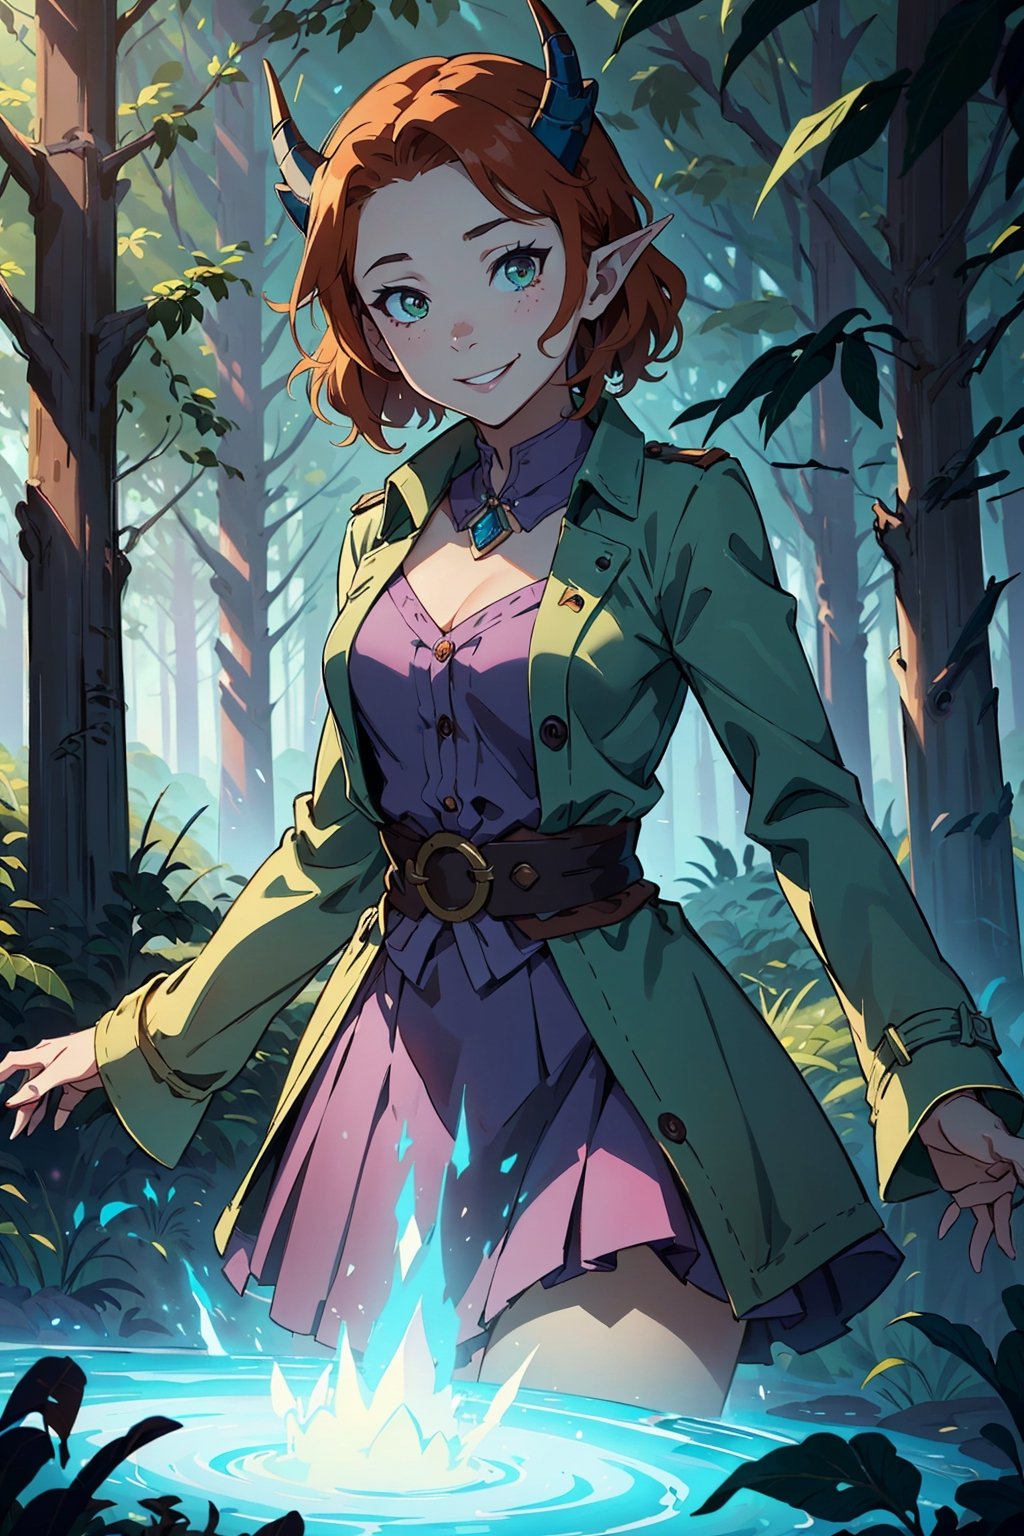 Imagine a female child with short fluffy and messy curly bright orange hair. Her eyes are a bright shade of green, sparkling with intricate detail and a hit on magic. She has pointed elf ears. She has two short horns on her head. She has an evil smile on her face that shows she's up to no good. She has warm freckles on her face. She wears a white button up long sleeve top and a long purple skirt and long green trench coat with lots of pockets. She is practicing magic that sparkles around her. The background is a charming forest path in the enchanted woods with bright lighting, creating a magical ambiance. This artwork captures the essence of mischief and magic against the backdrop of a beautiful setting. detailed, detail_eyes, detailed_hair, detailed_scenario, detailed_hands, detailed_background,FFIXBG, fantasy.,Tex Mex Burrito Style,aka shiba,yoshida akihiko,MOLESTATION,SAM YANG,vox machina style,niloudef,monadef,KurashimaChiyuri, flat chest, short hair